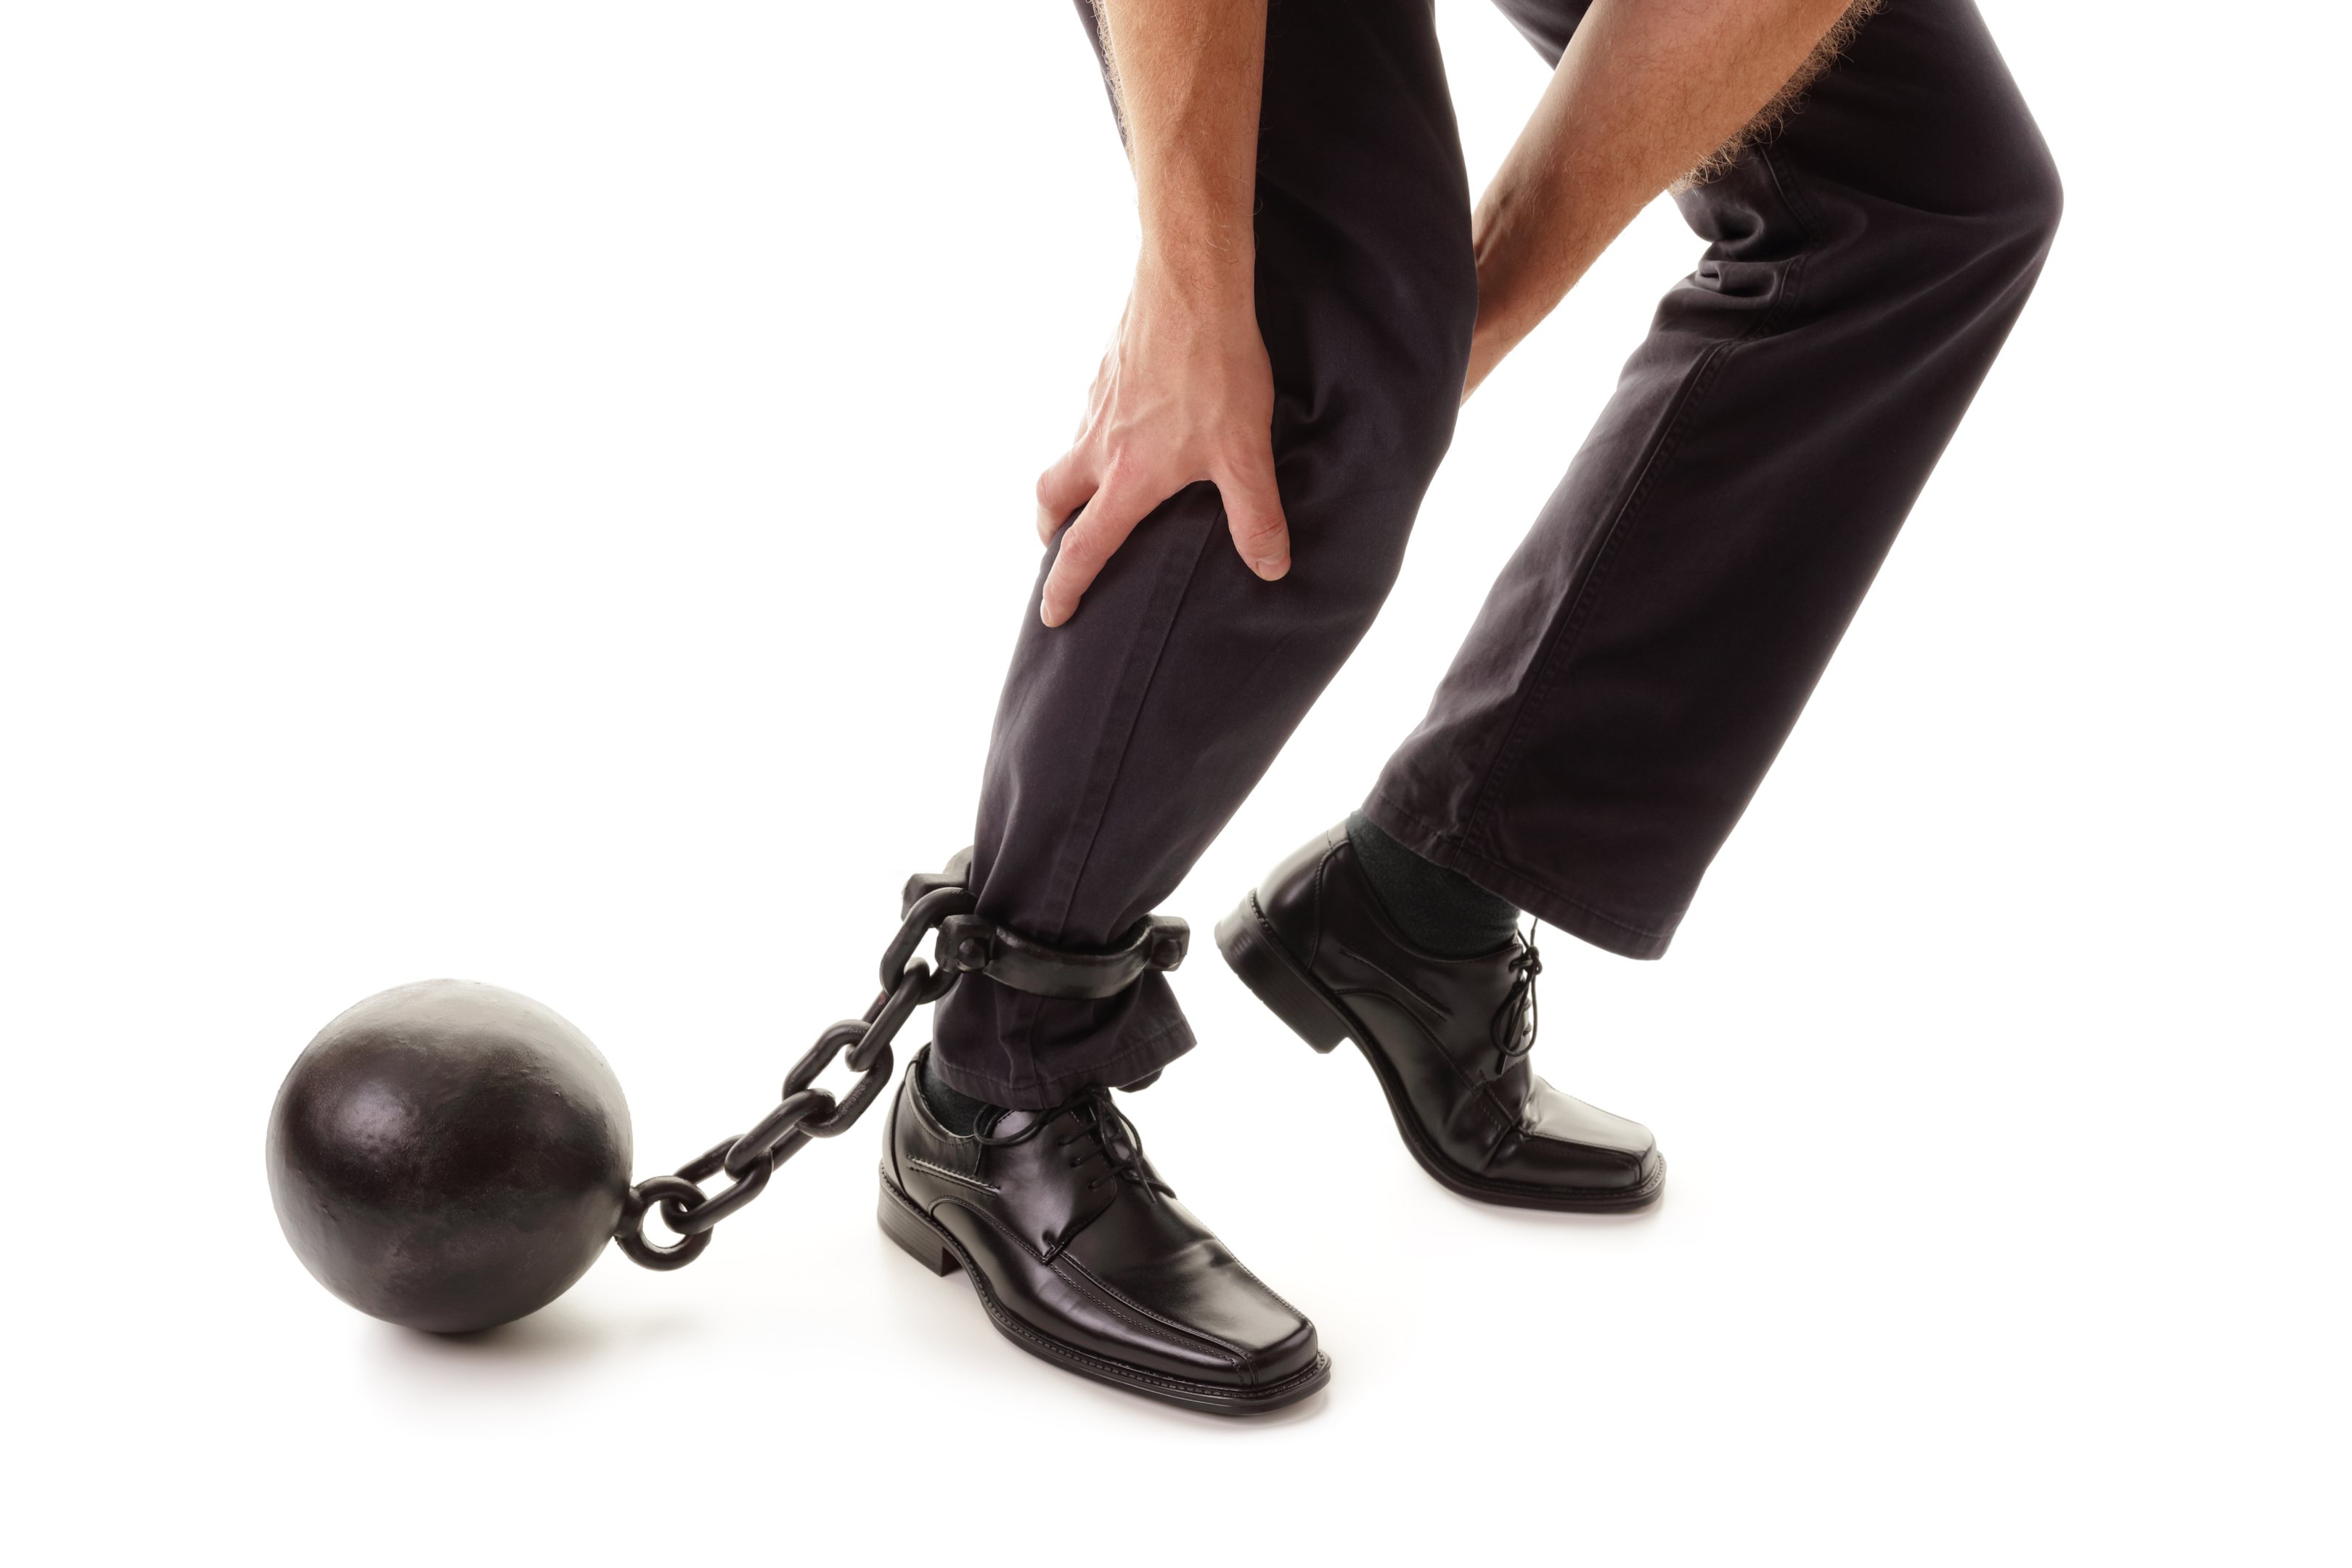 ball and chain on someone's ankle signifying tax liability to the Internal Revenue Service